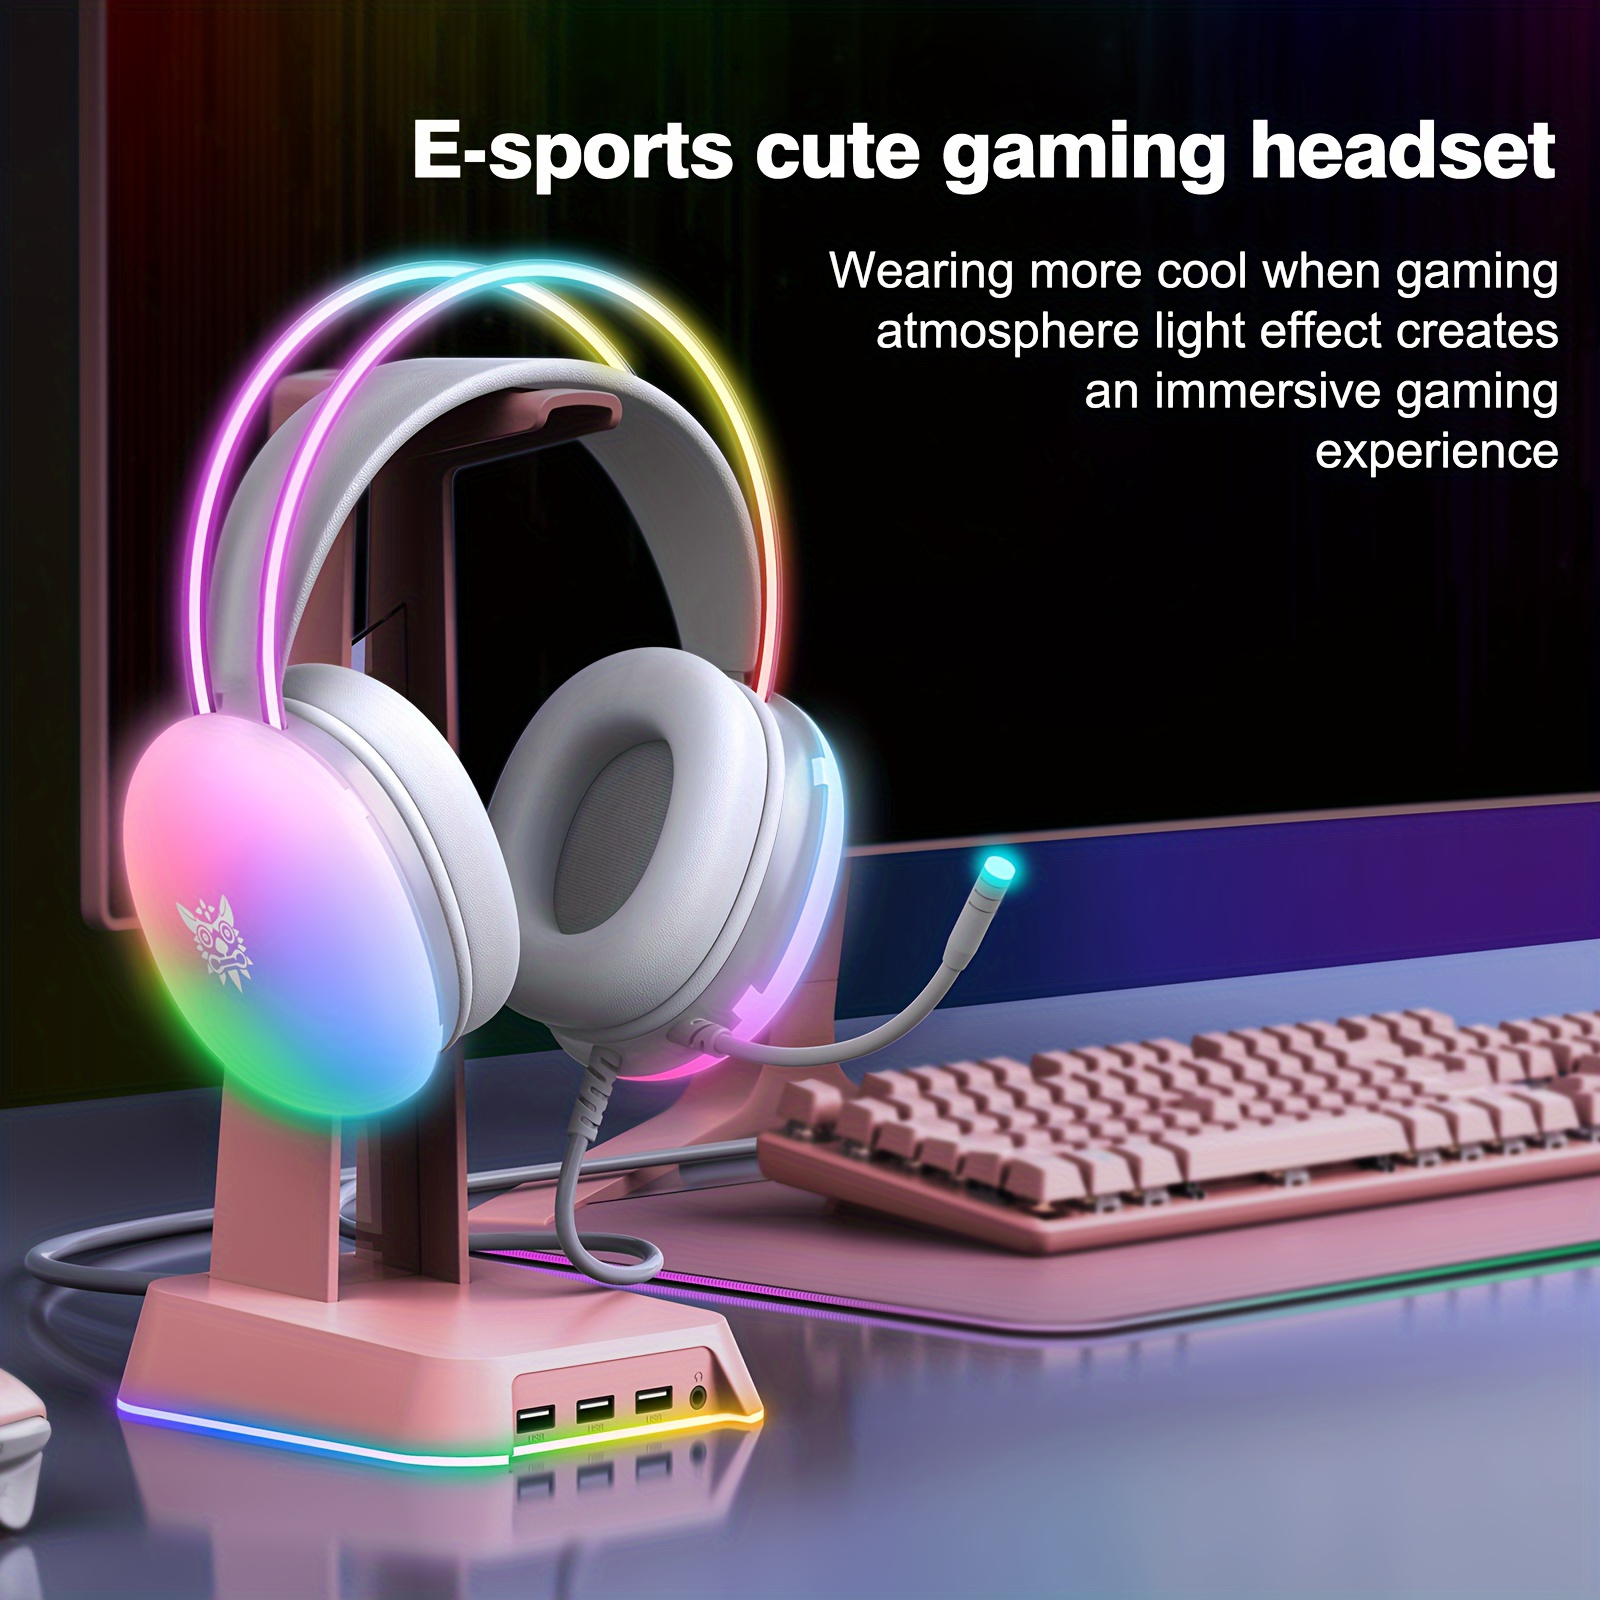 

Onikuma X25 Wearable Gaming Headset With Microphone Full Luminous Rgb Computer For Pc Wired Game Headset With Rgb Light, Headset With Noise Surround Sound And Wired 3.5mm Jack